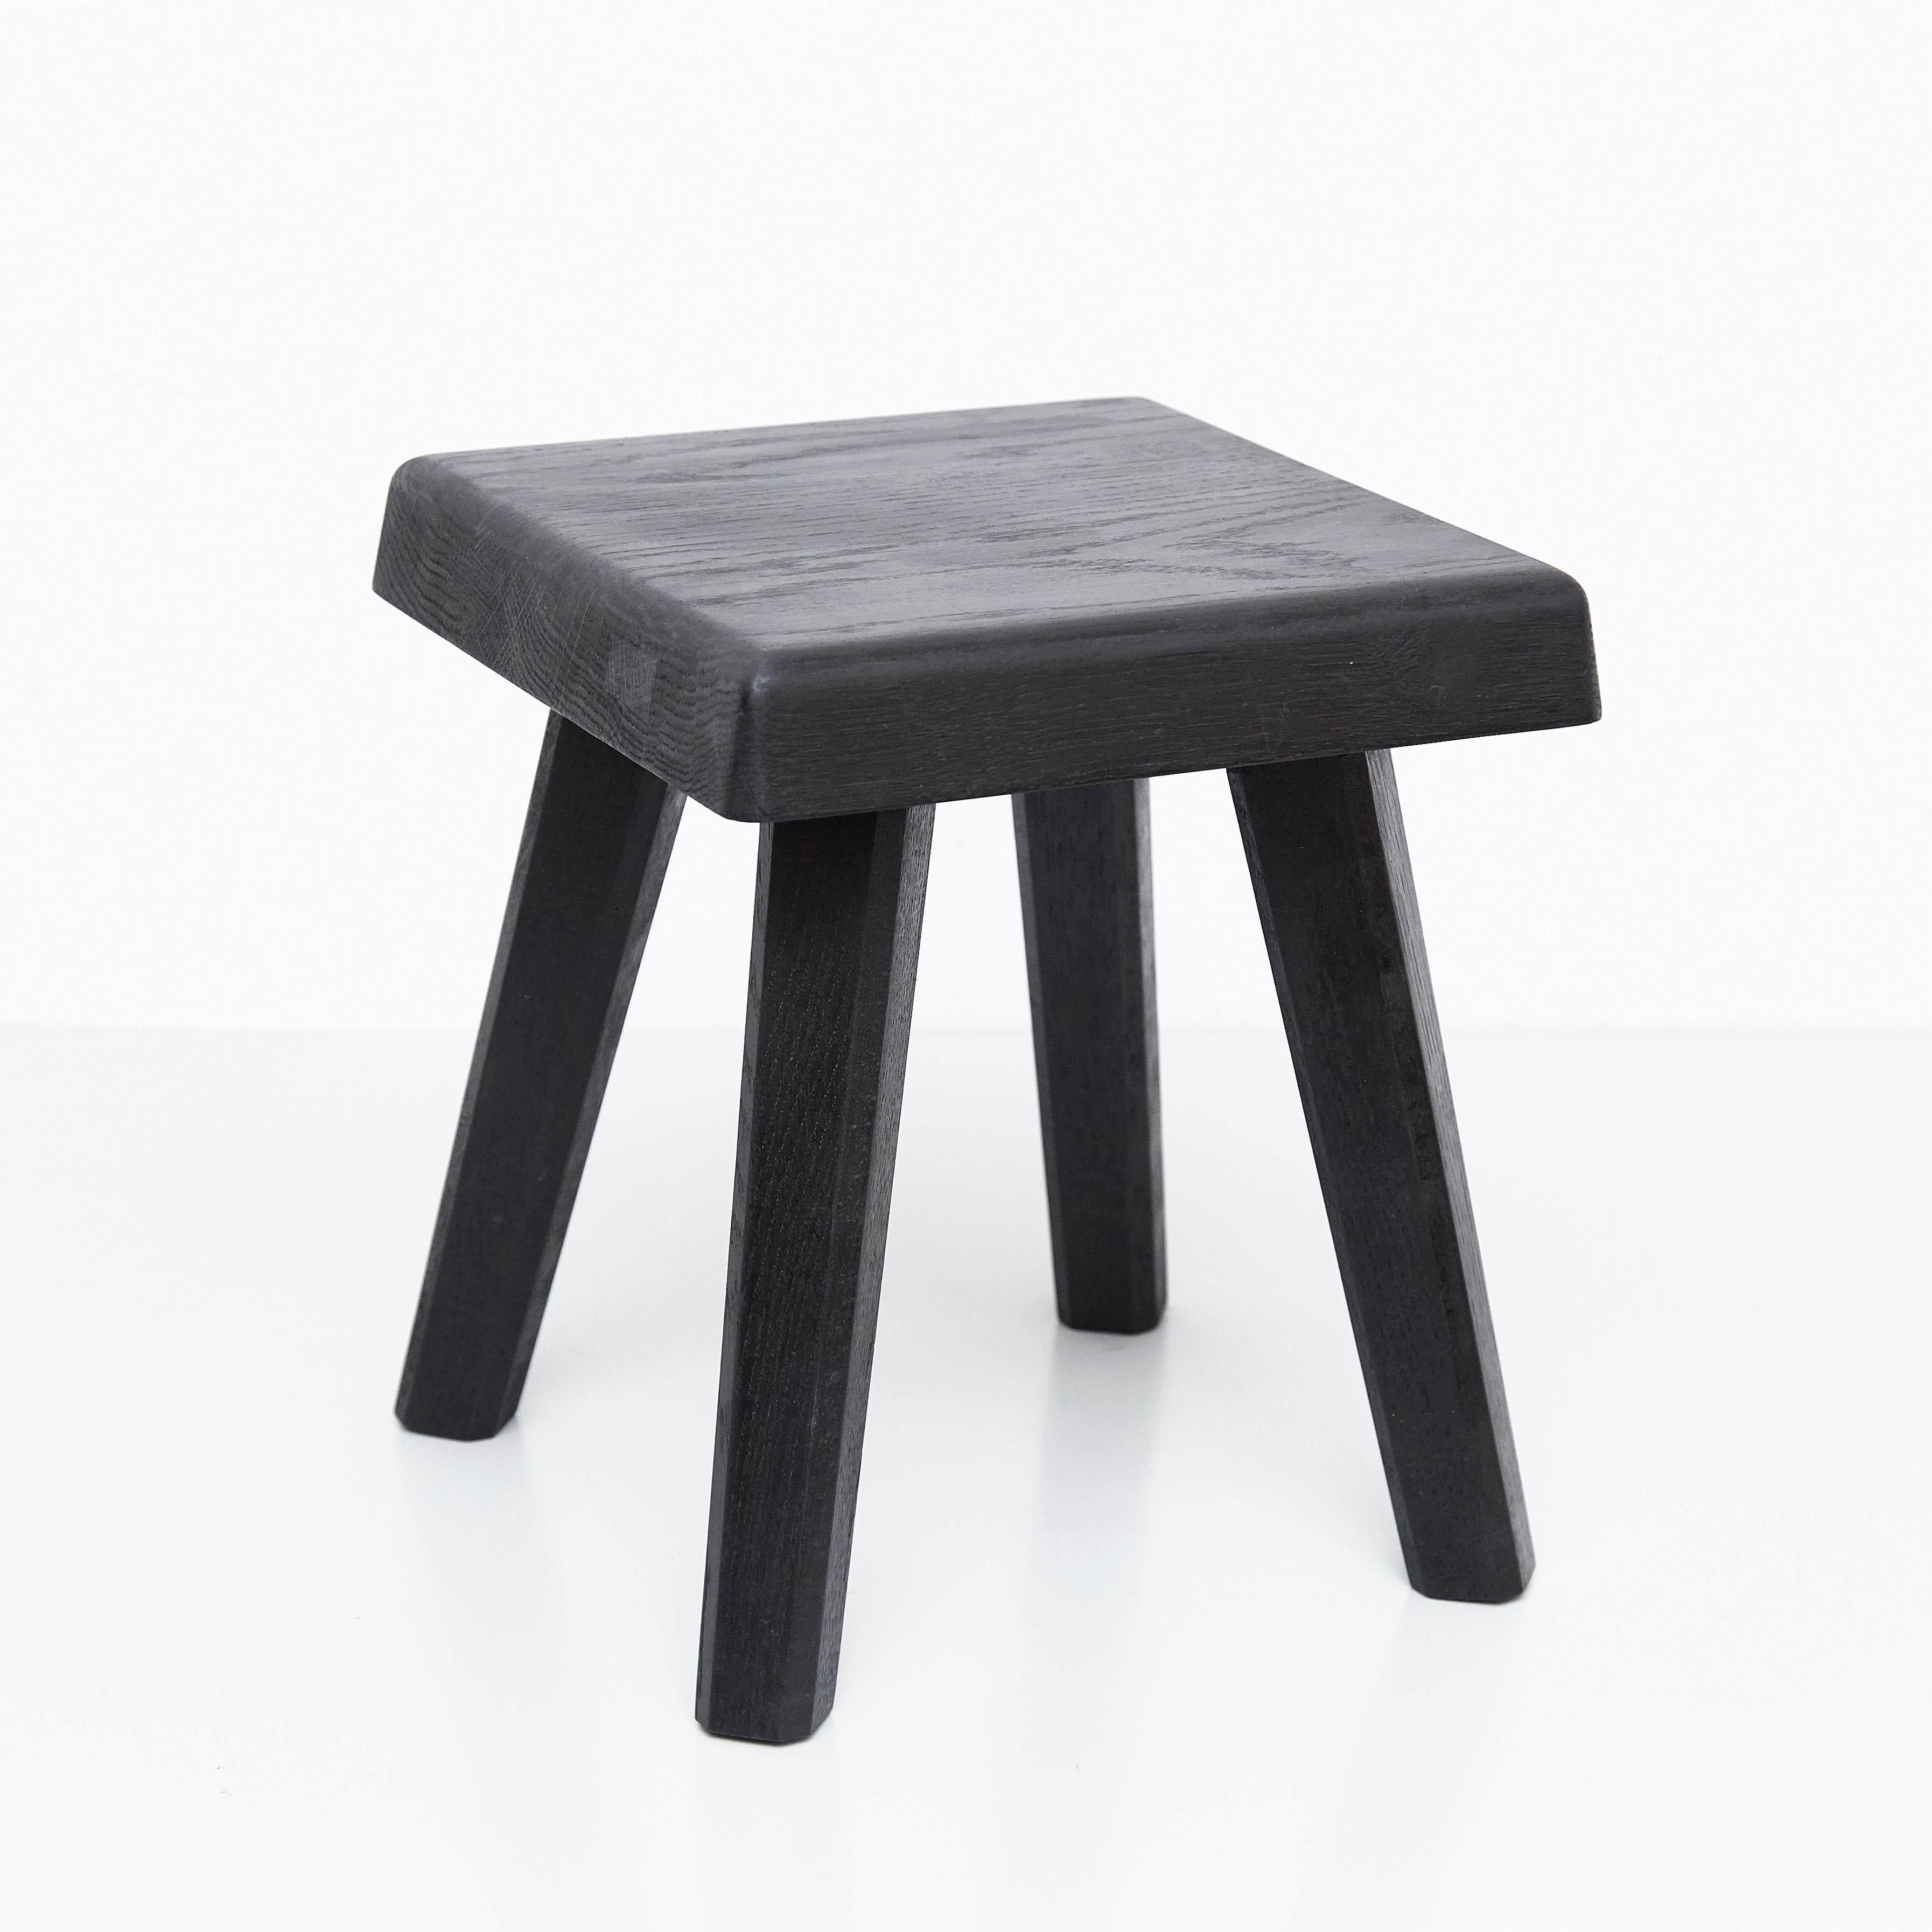 Stool designed by Pierre Chapo in 1960s.
Manufactured in France in 2019

Solid oakwood.
Measures: Small: 29 x 29 x 33 cm
Tall: 29 x 29 x 45 cm
In good original condition, with minor wear consistent with age and use, preserving a beautiful